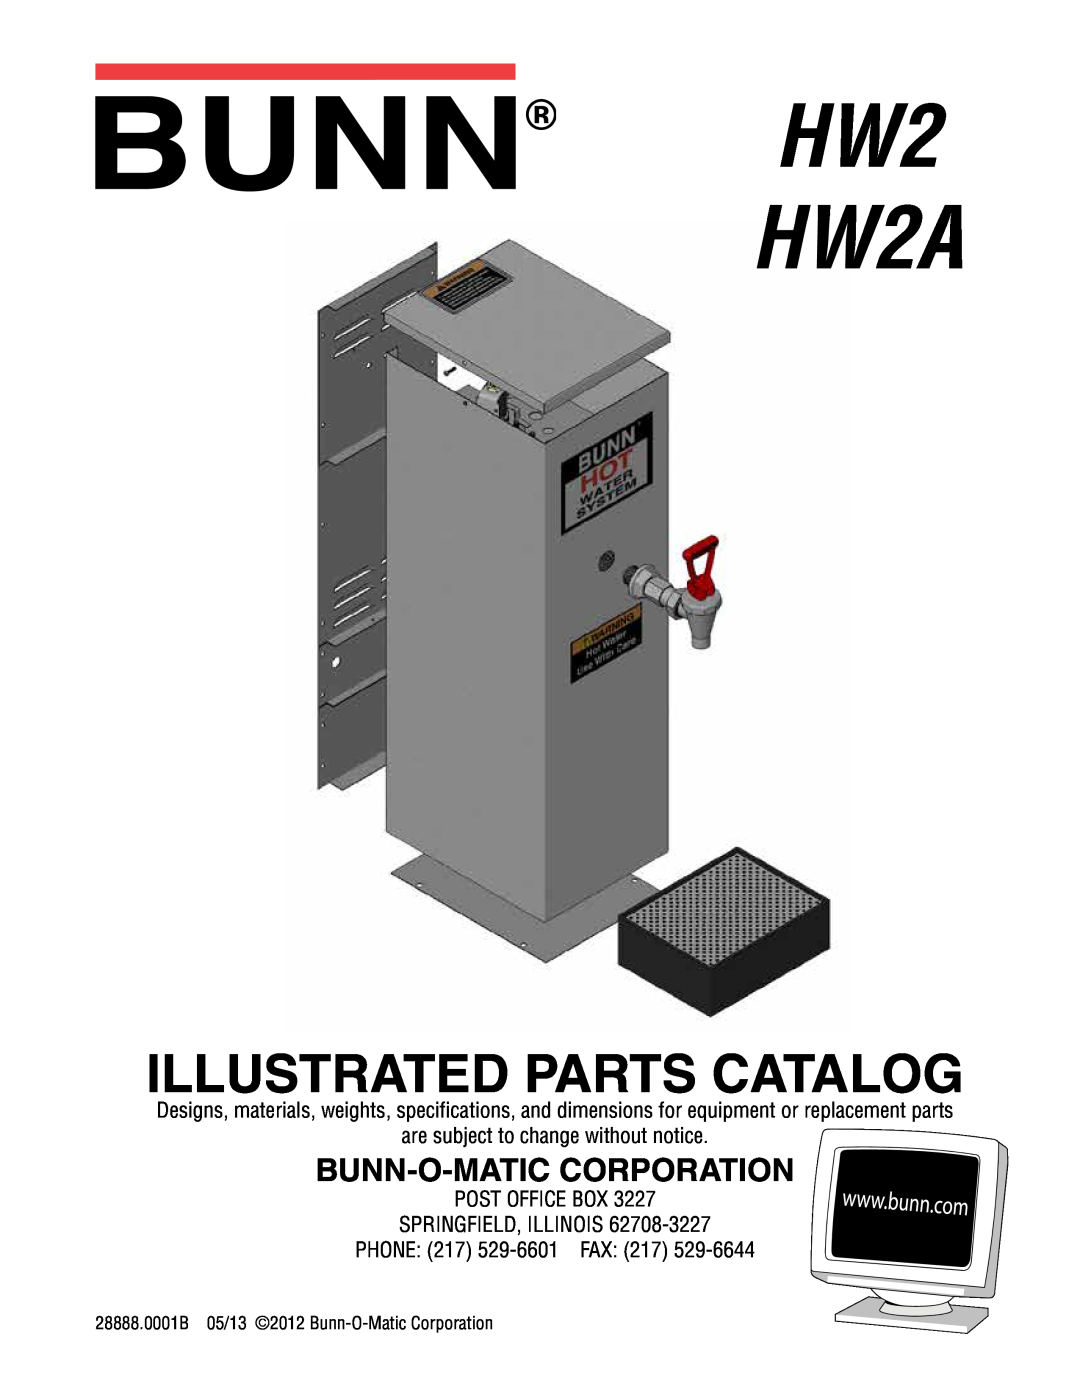 Bunn specifications Bunn-O-Maticcorporation, are subject to change without notice, PHONE 217 529-6601FAX, HW2 HW2A 